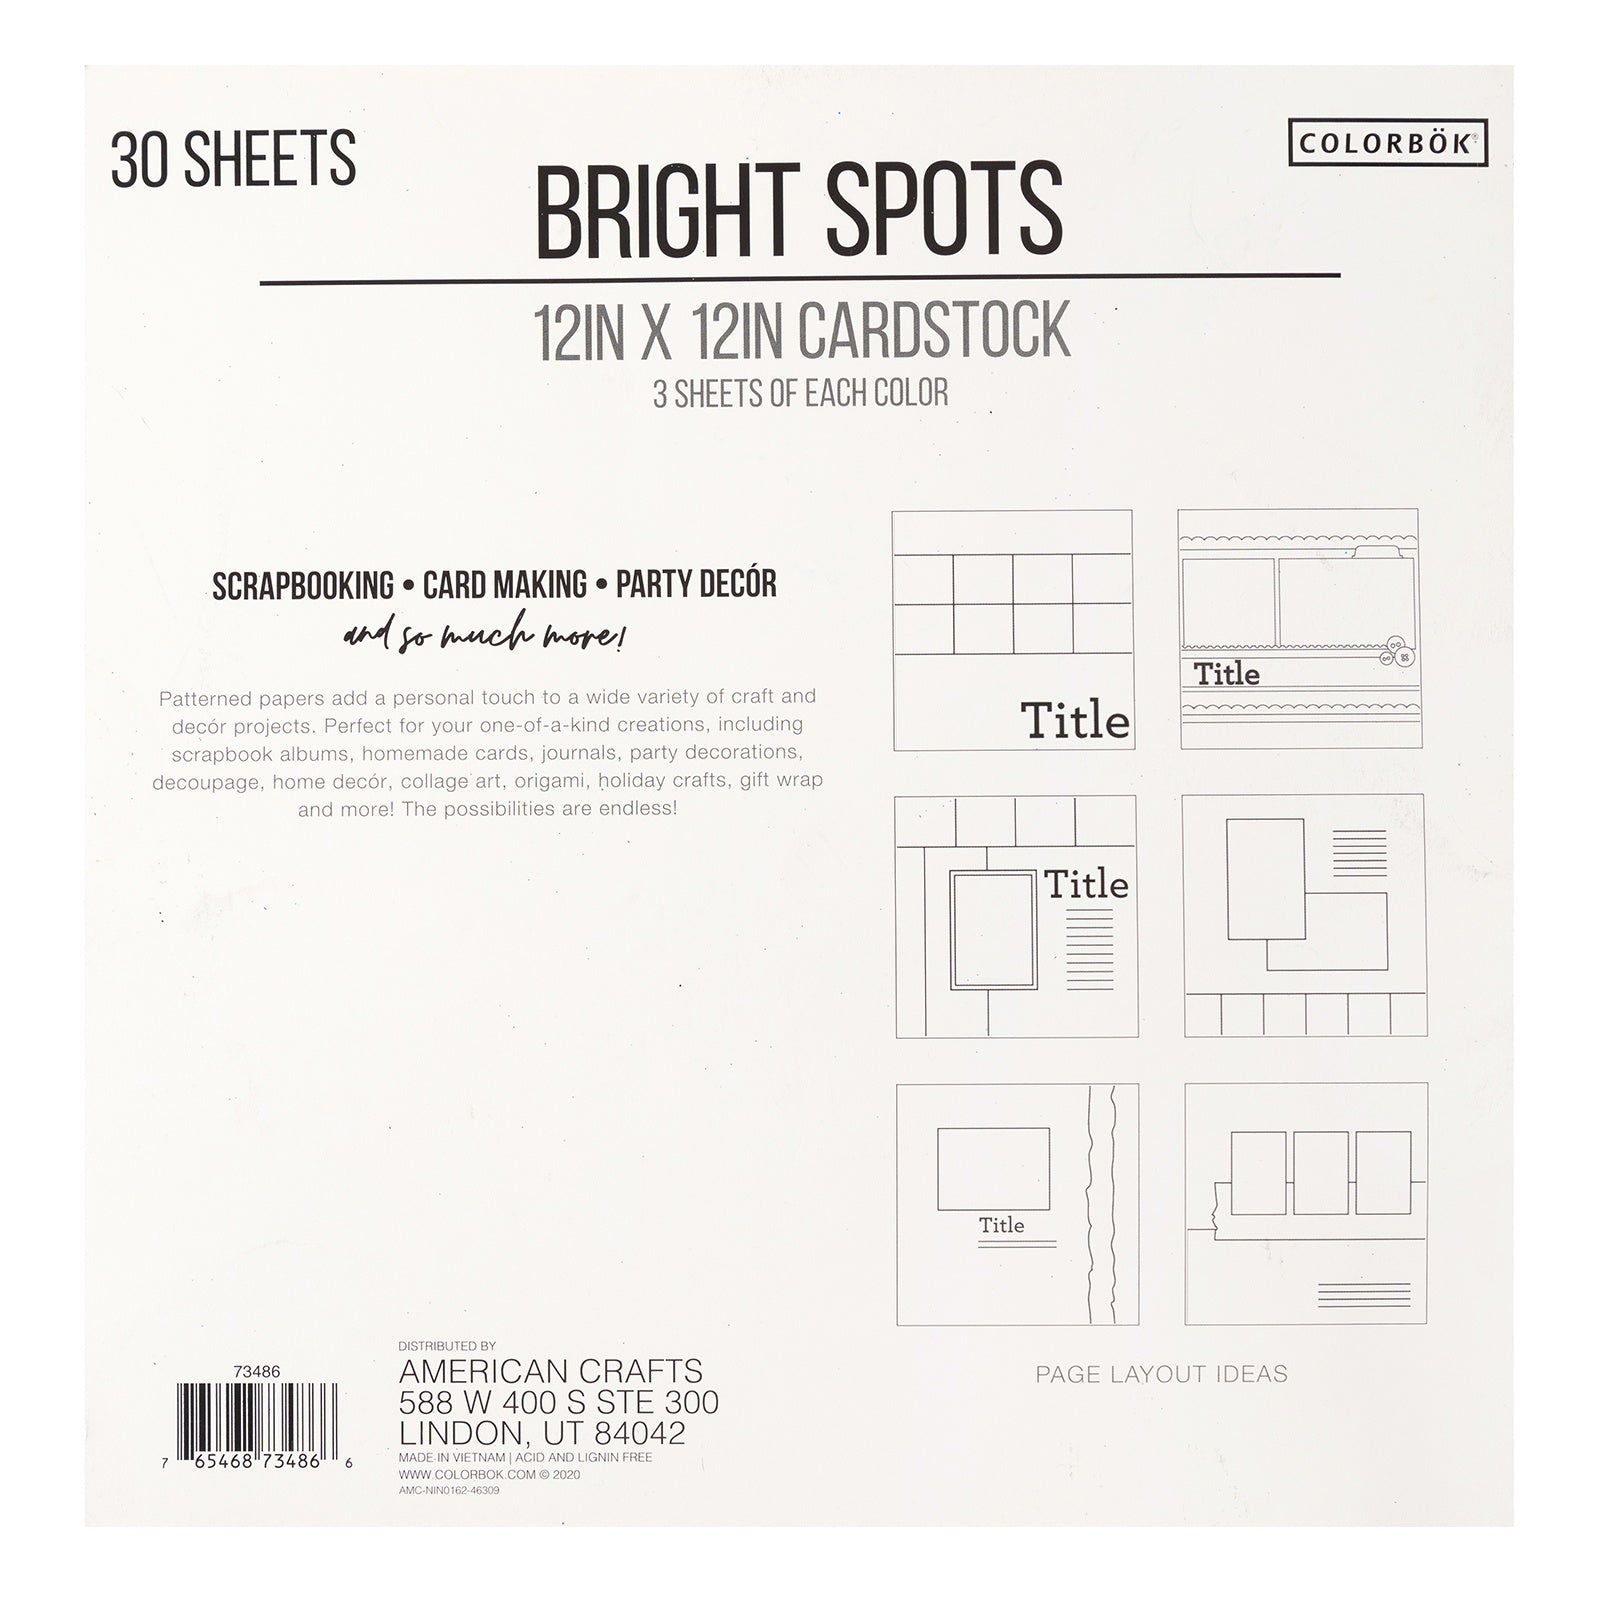 Colorbok Smooth Brown Craft Cardstock, 12x12, 67 lb./100 gsm, 30 Sheets